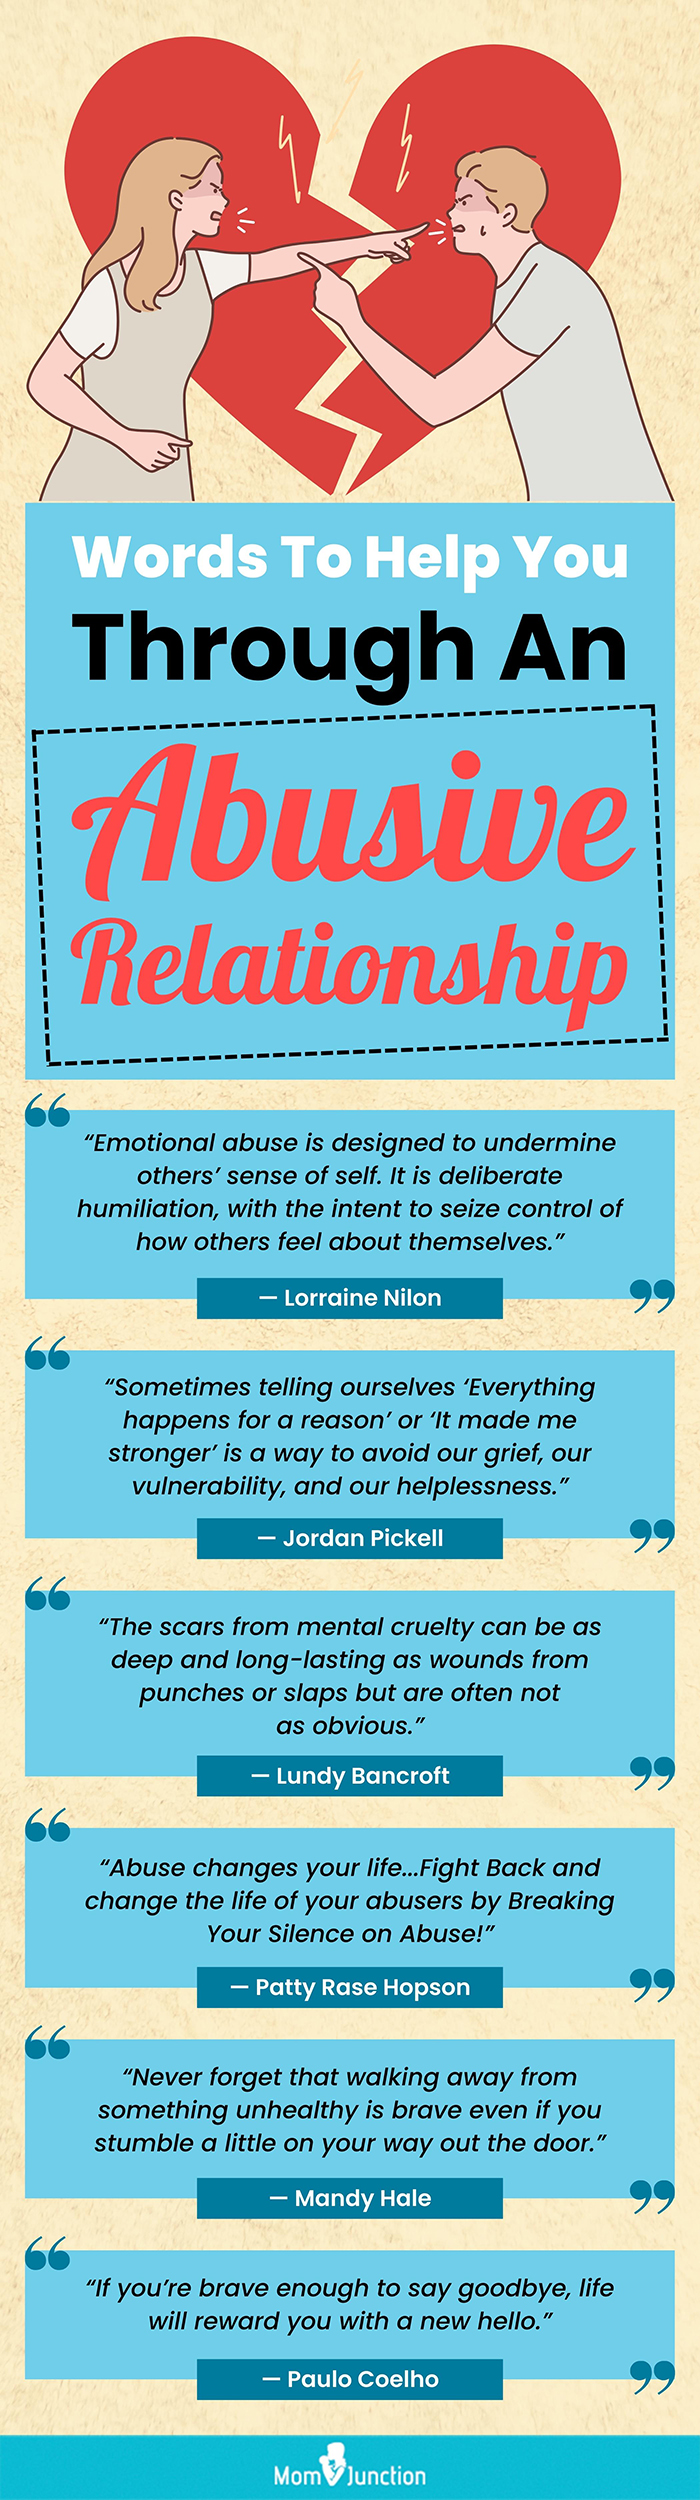 quotes on abusive relationships (infographic)